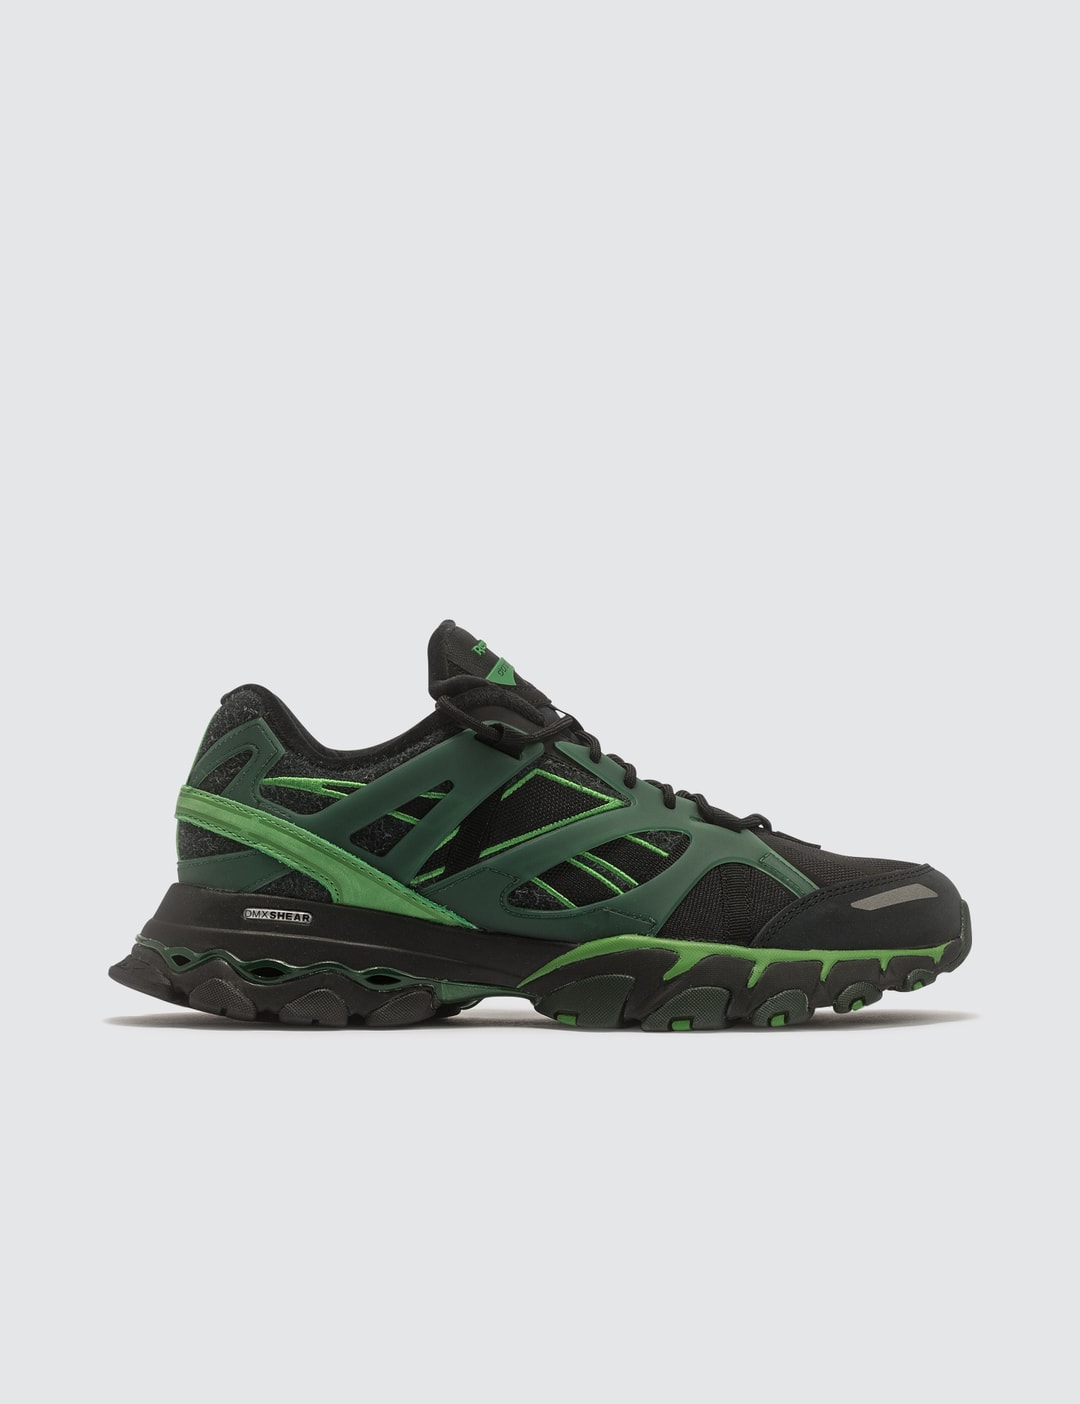 Cottweiler - Cottweiler x Reebok DMX Trail Shadow | HBX - Globally Curated Fashion and Lifestyle by